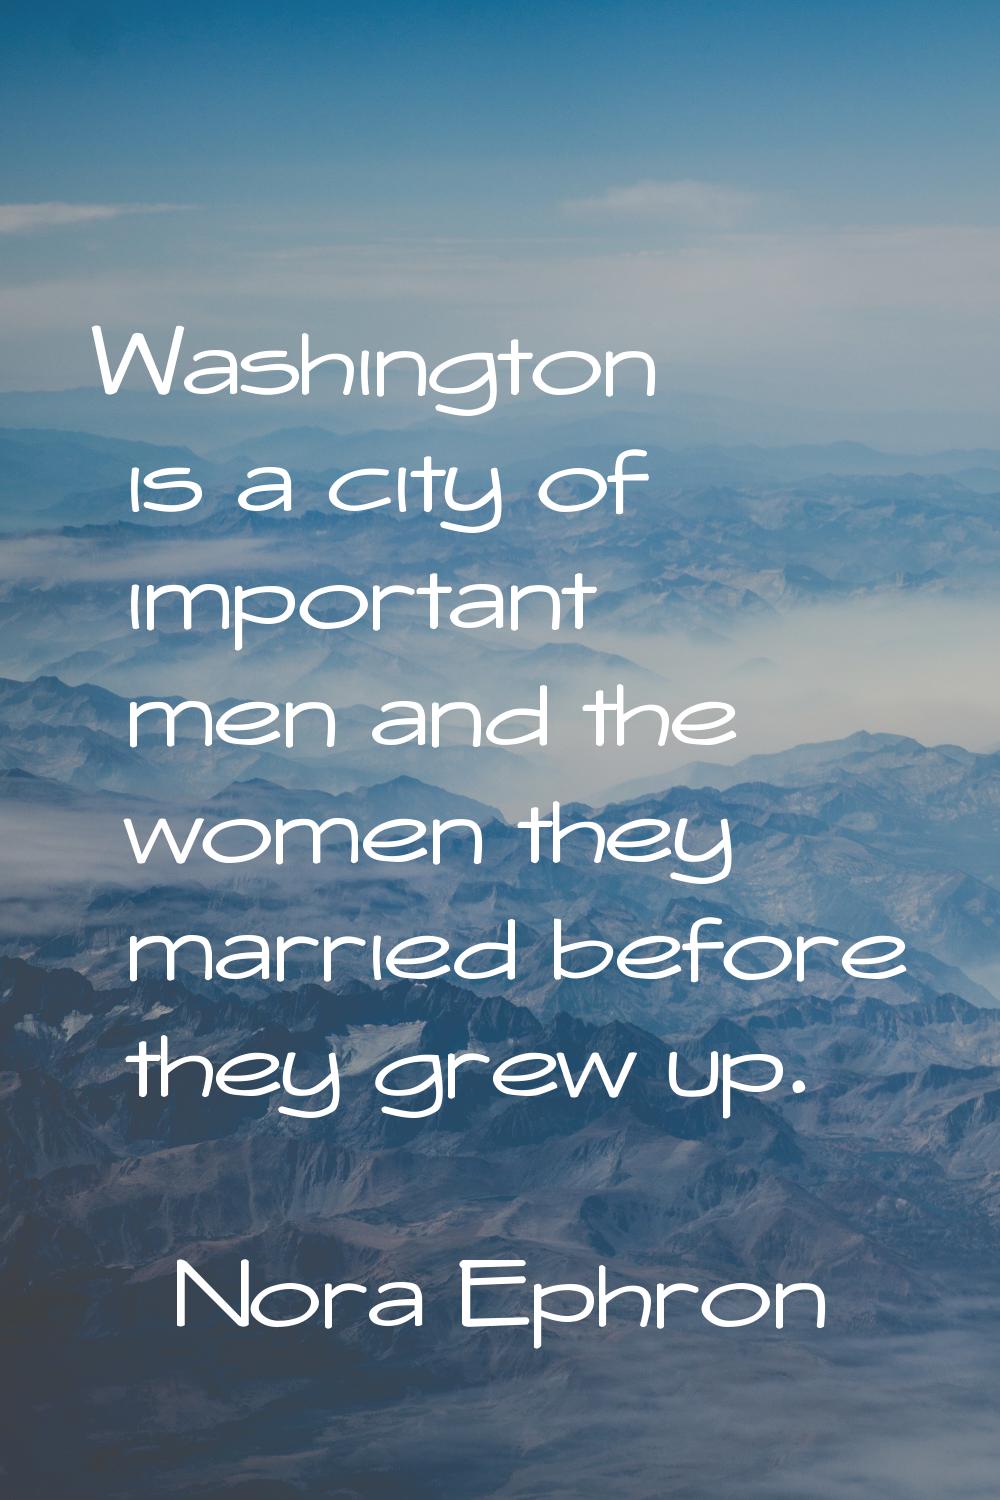 Washington is a city of important men and the women they married before they grew up.